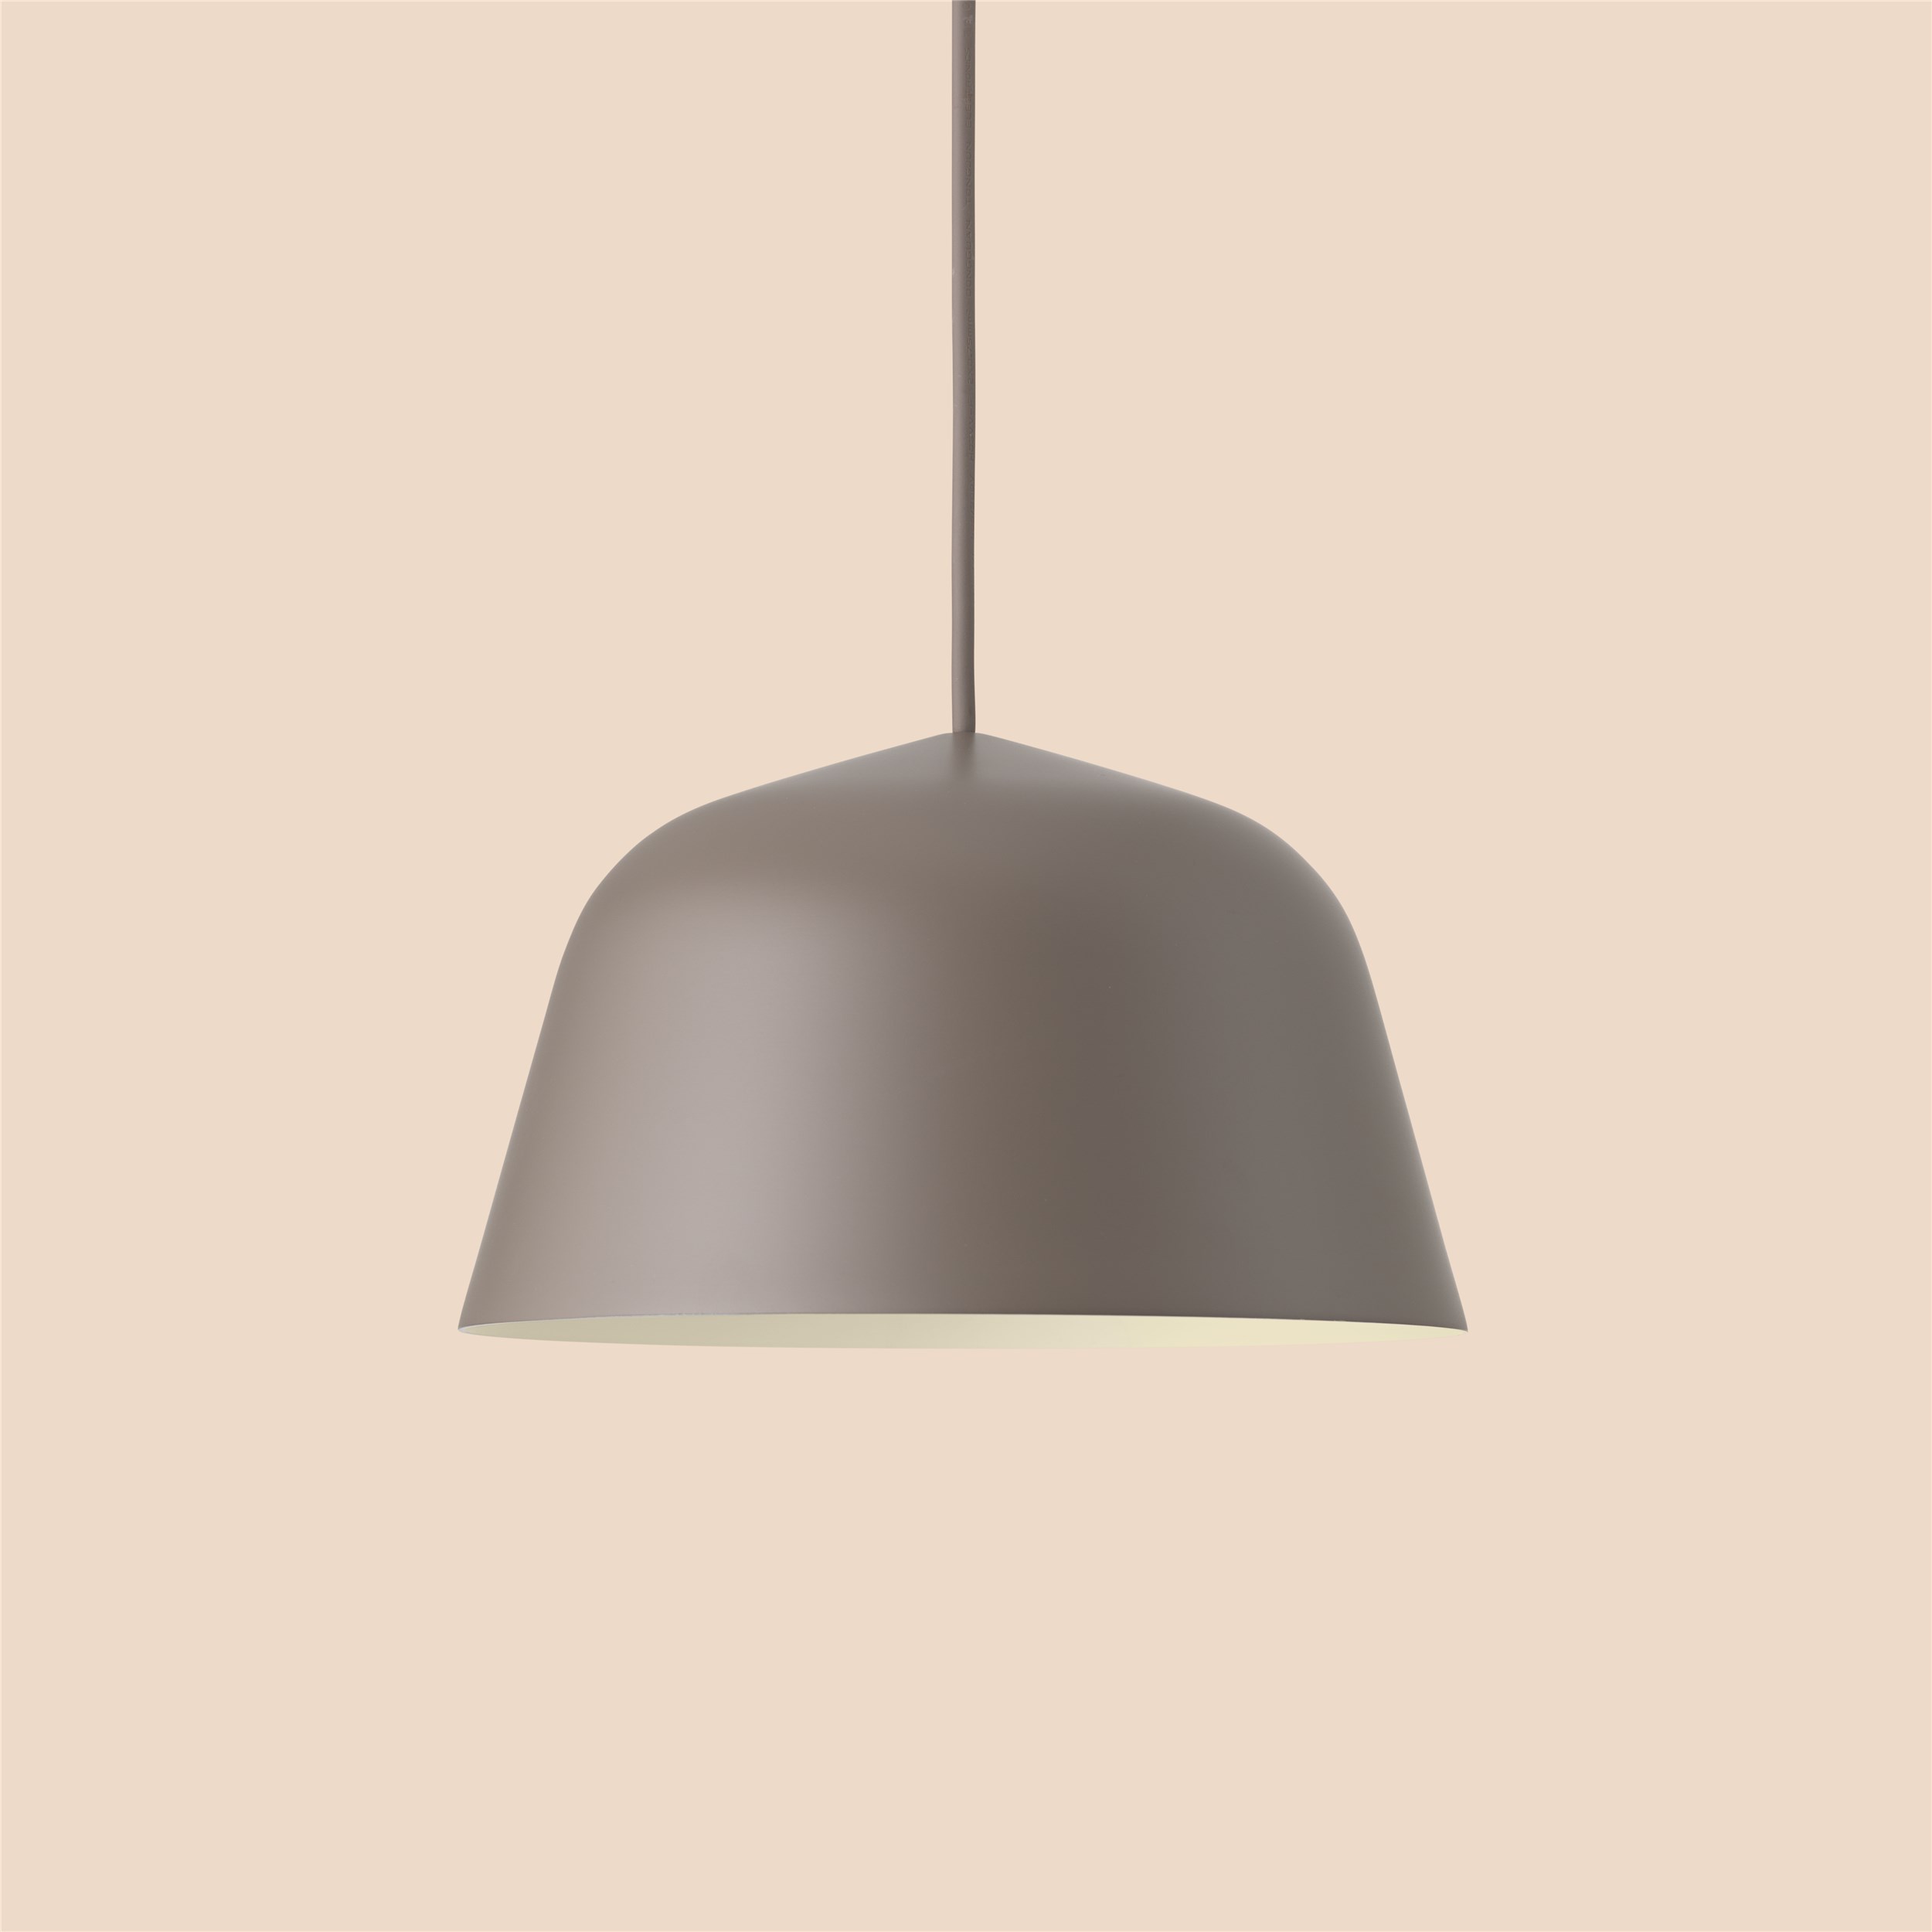 Ambit pendant lamp in taupe colour 